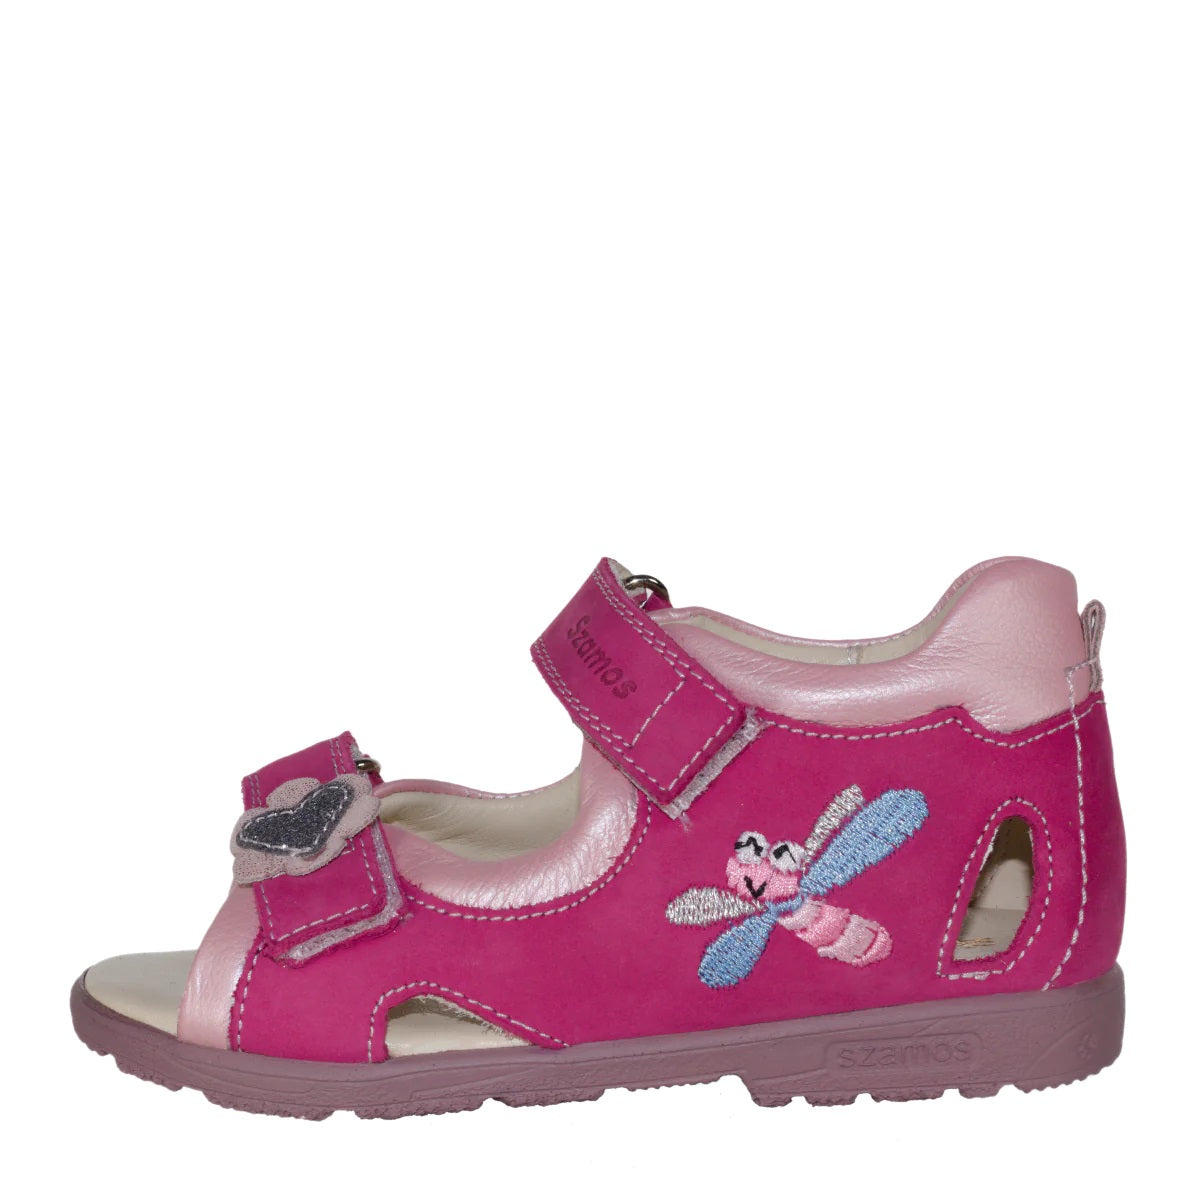 Szamos kid girl supinated sandals in pink color and fly pattern with double velcro strap toddler/little kid size